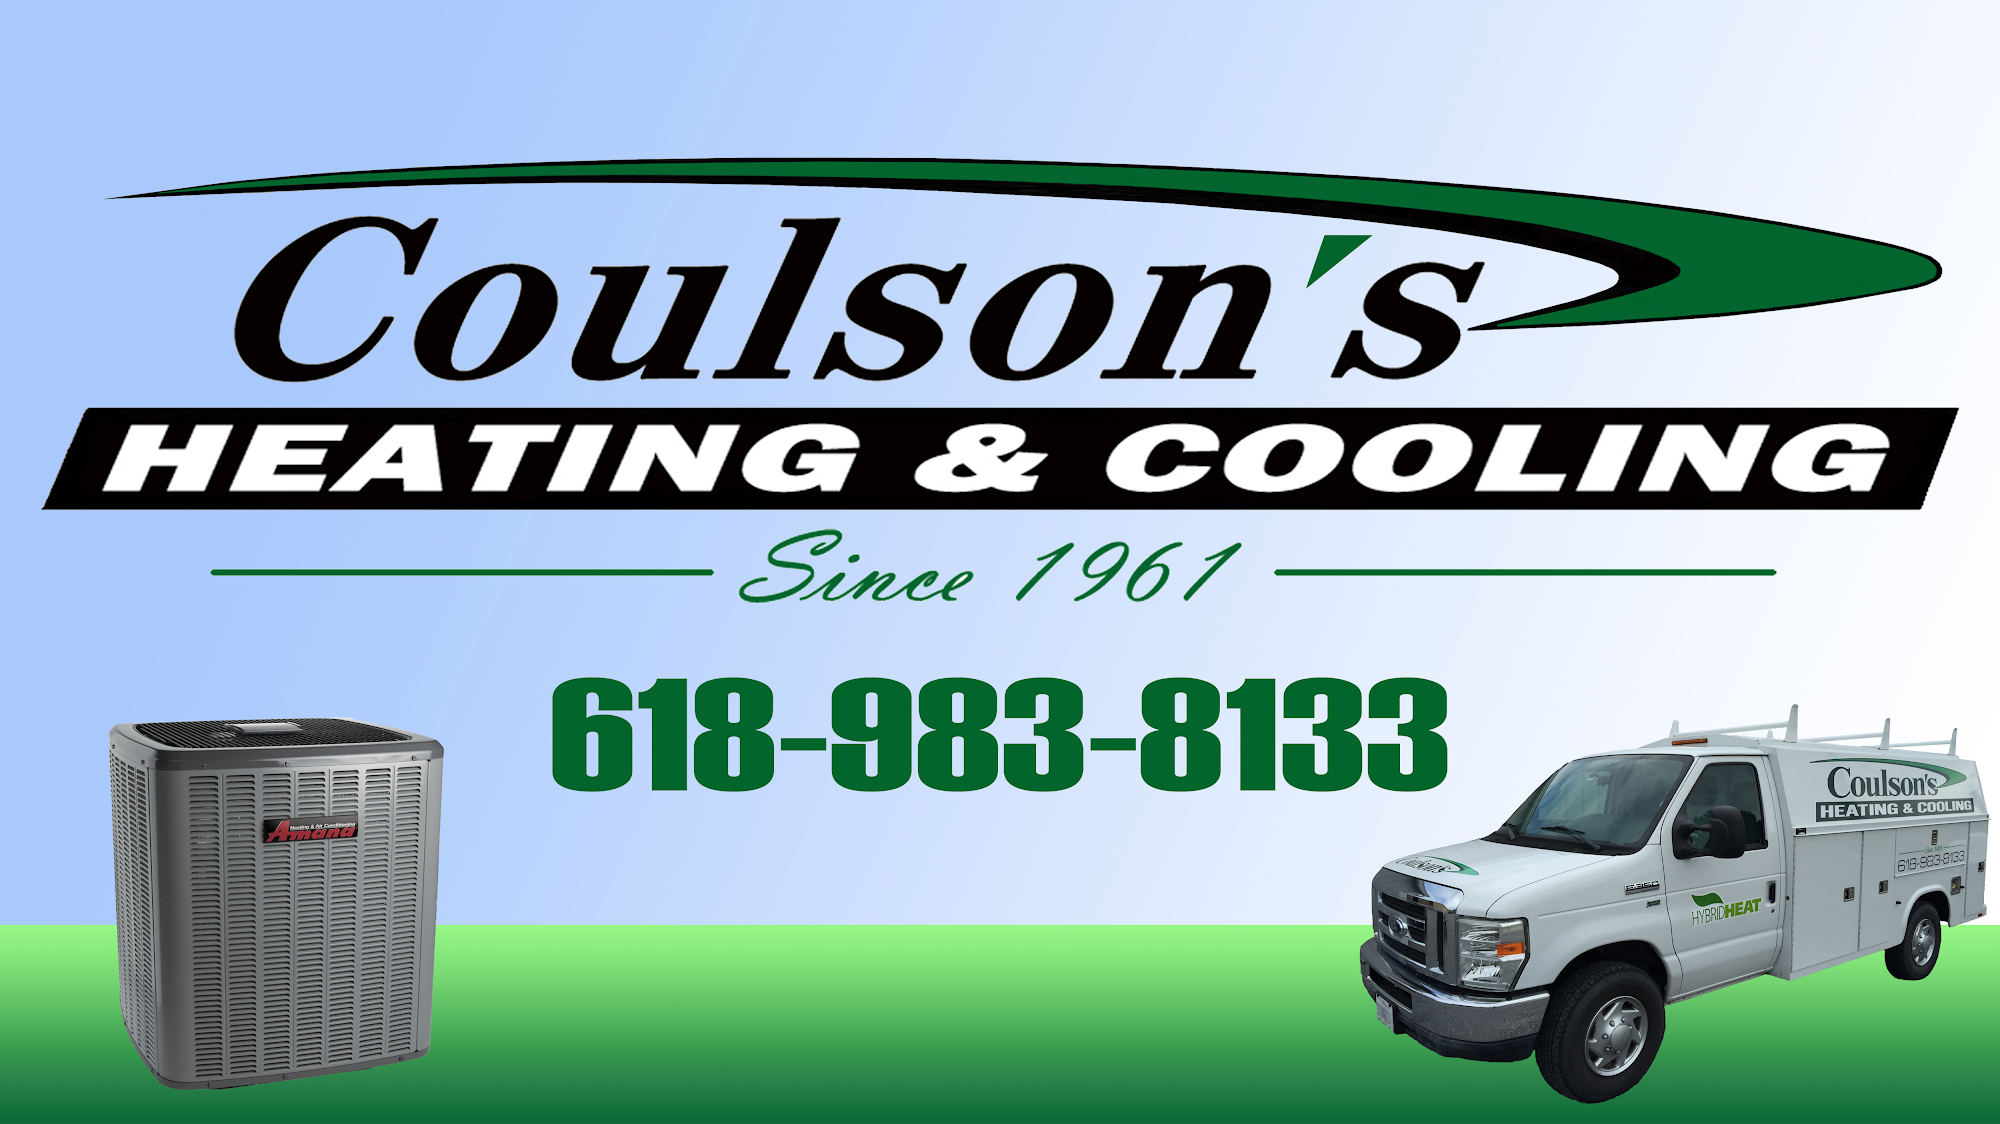 Coulson's Heating & Cooling